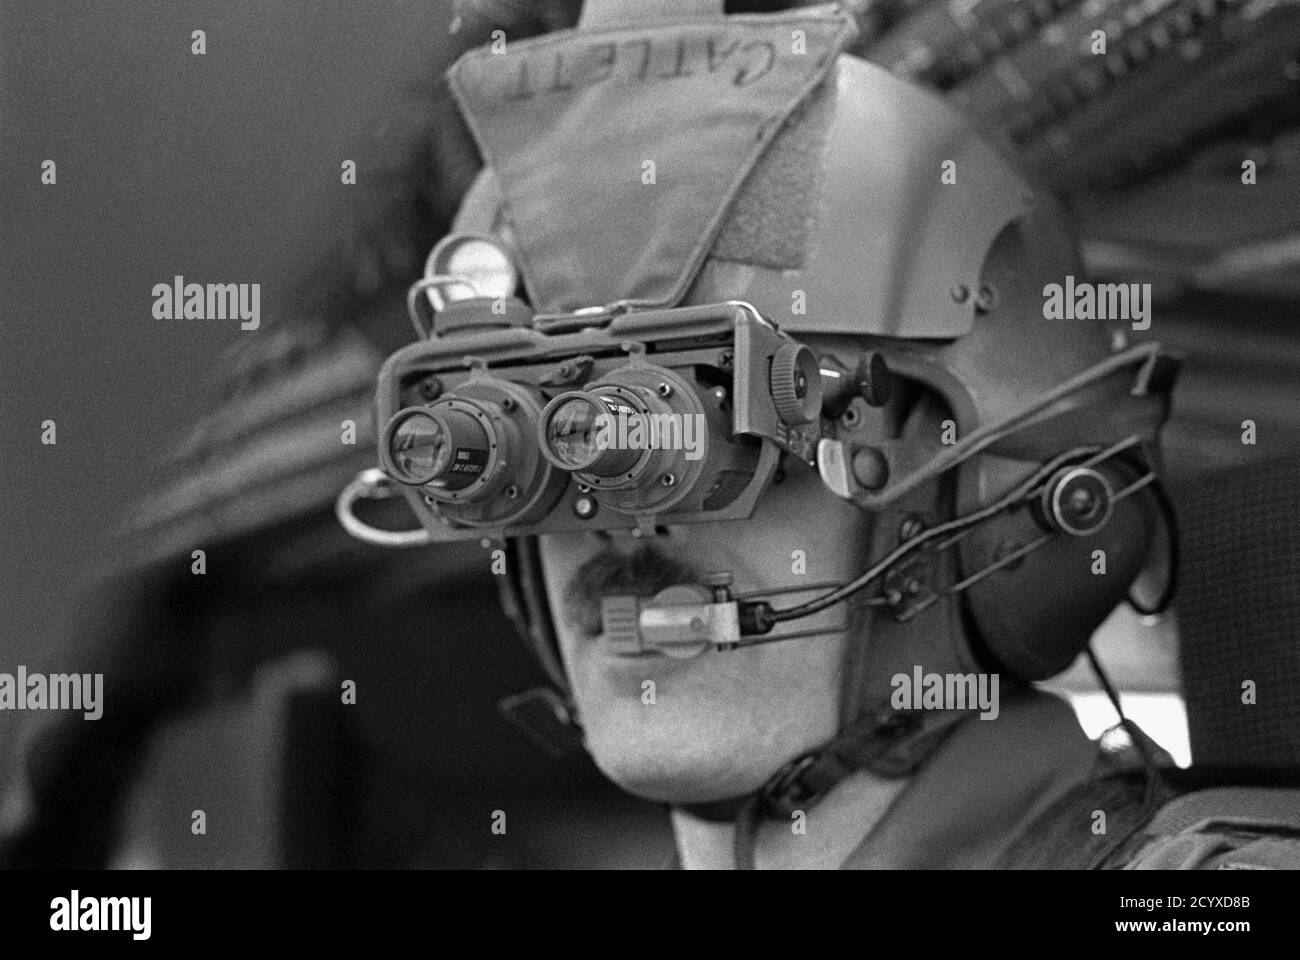 NATO exercises in Germany, US Army helicopter pilot with night viewers  (January 1985) Stock Photo